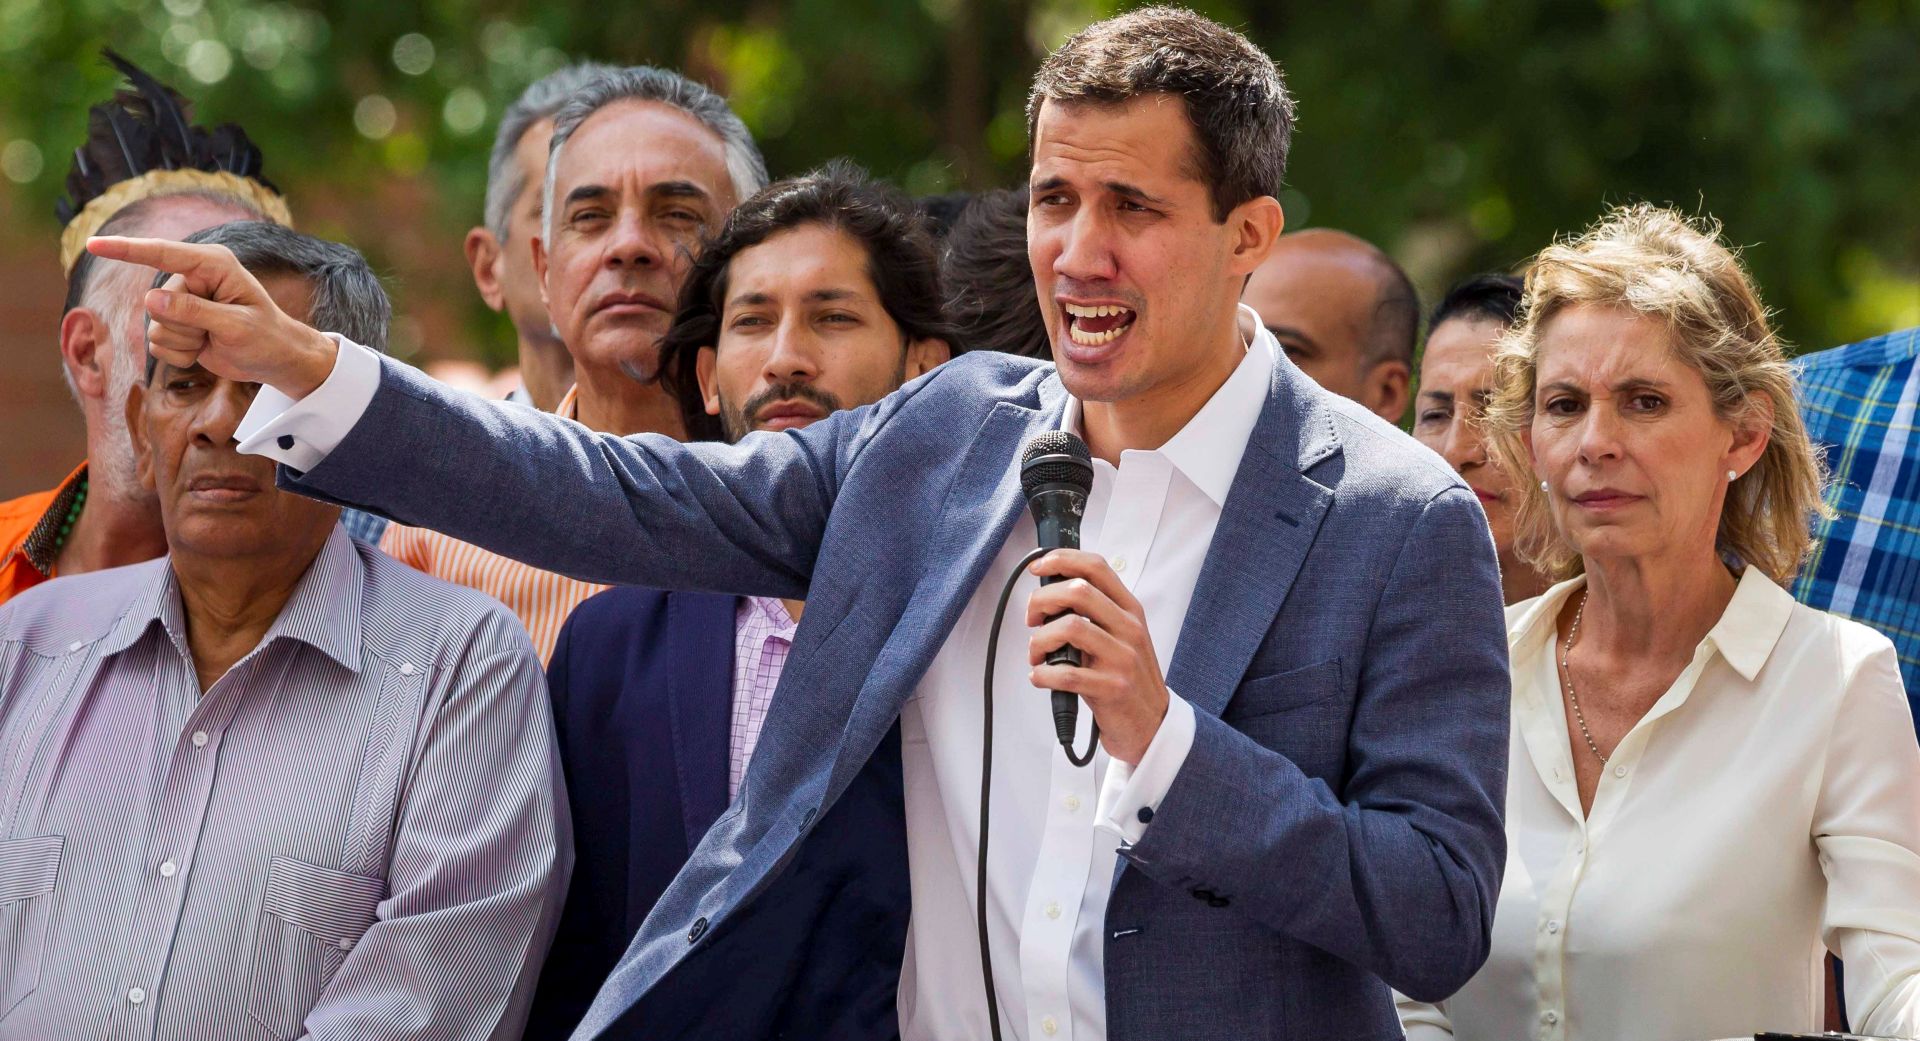 epa07276071 President of the Venezuelan National Assembly Juan Guaido (C) participates in a protest to denounce the 'illegitimacy' of Nicolas Maduro's Government, in Caracas, Venezuela, 11 January 2019. President of the Venezuelan National Assembly Juan Guaido demanded the support of citizens, members of the military and the international community to take control of the Executive.  EPA/MIGUEL GUTIERREZ